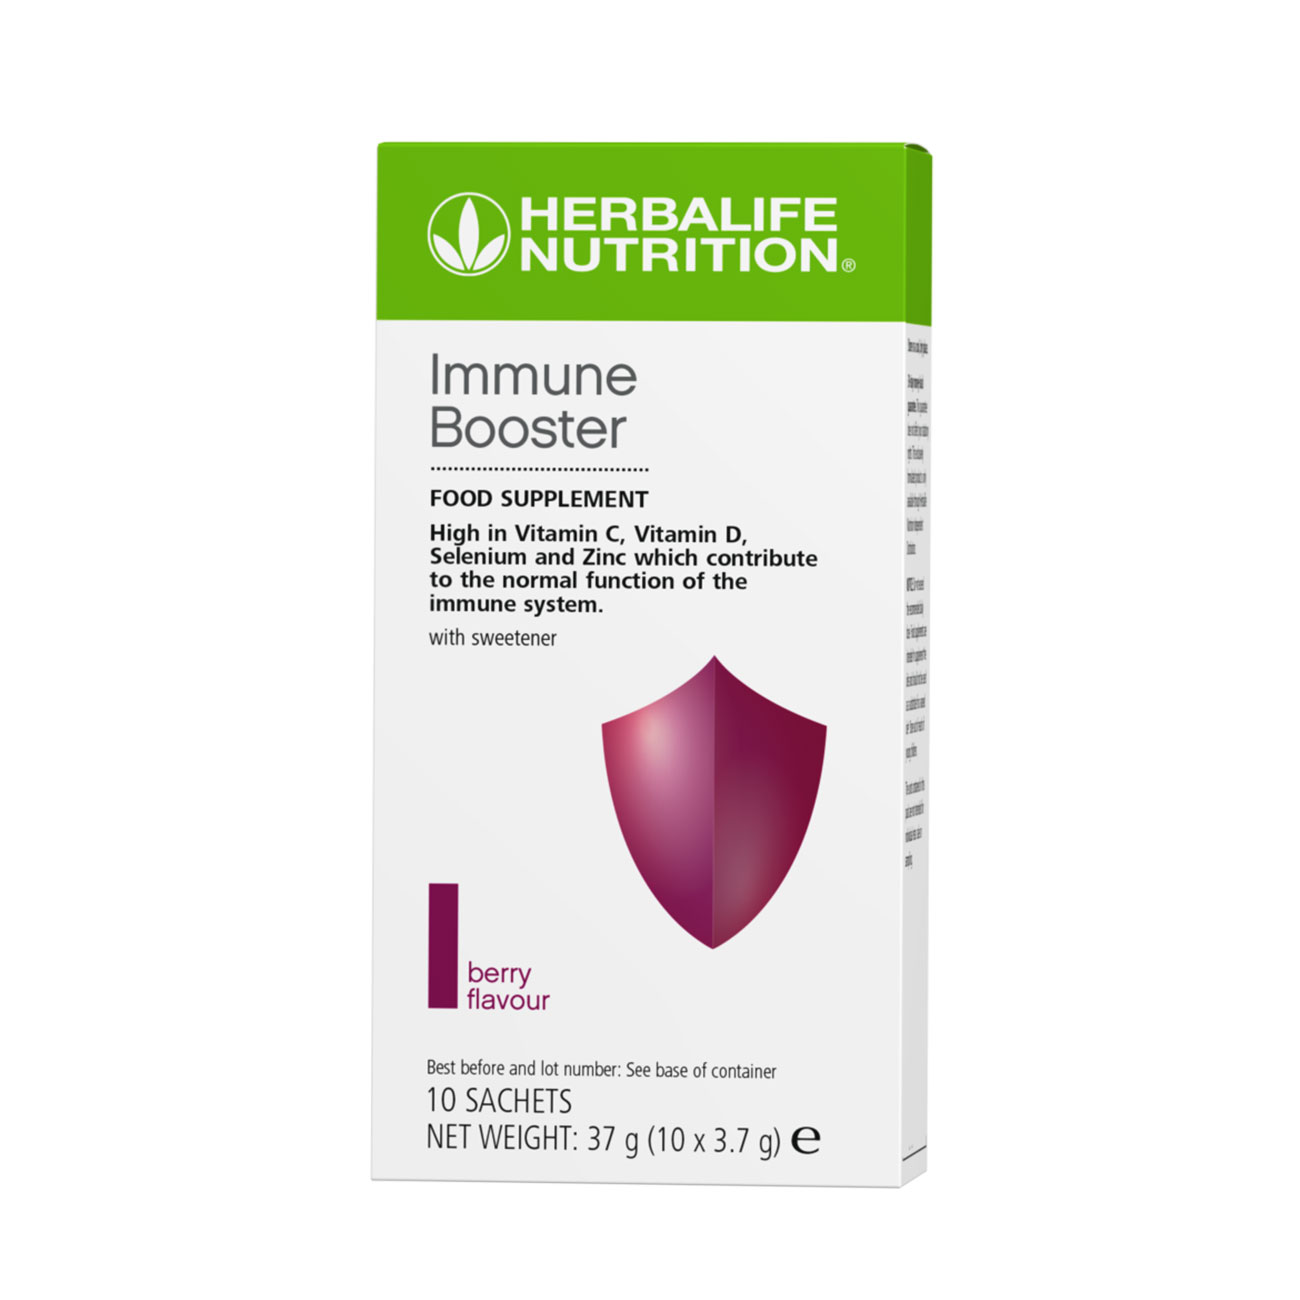 Immune Booster Food Supplement Drink product shot